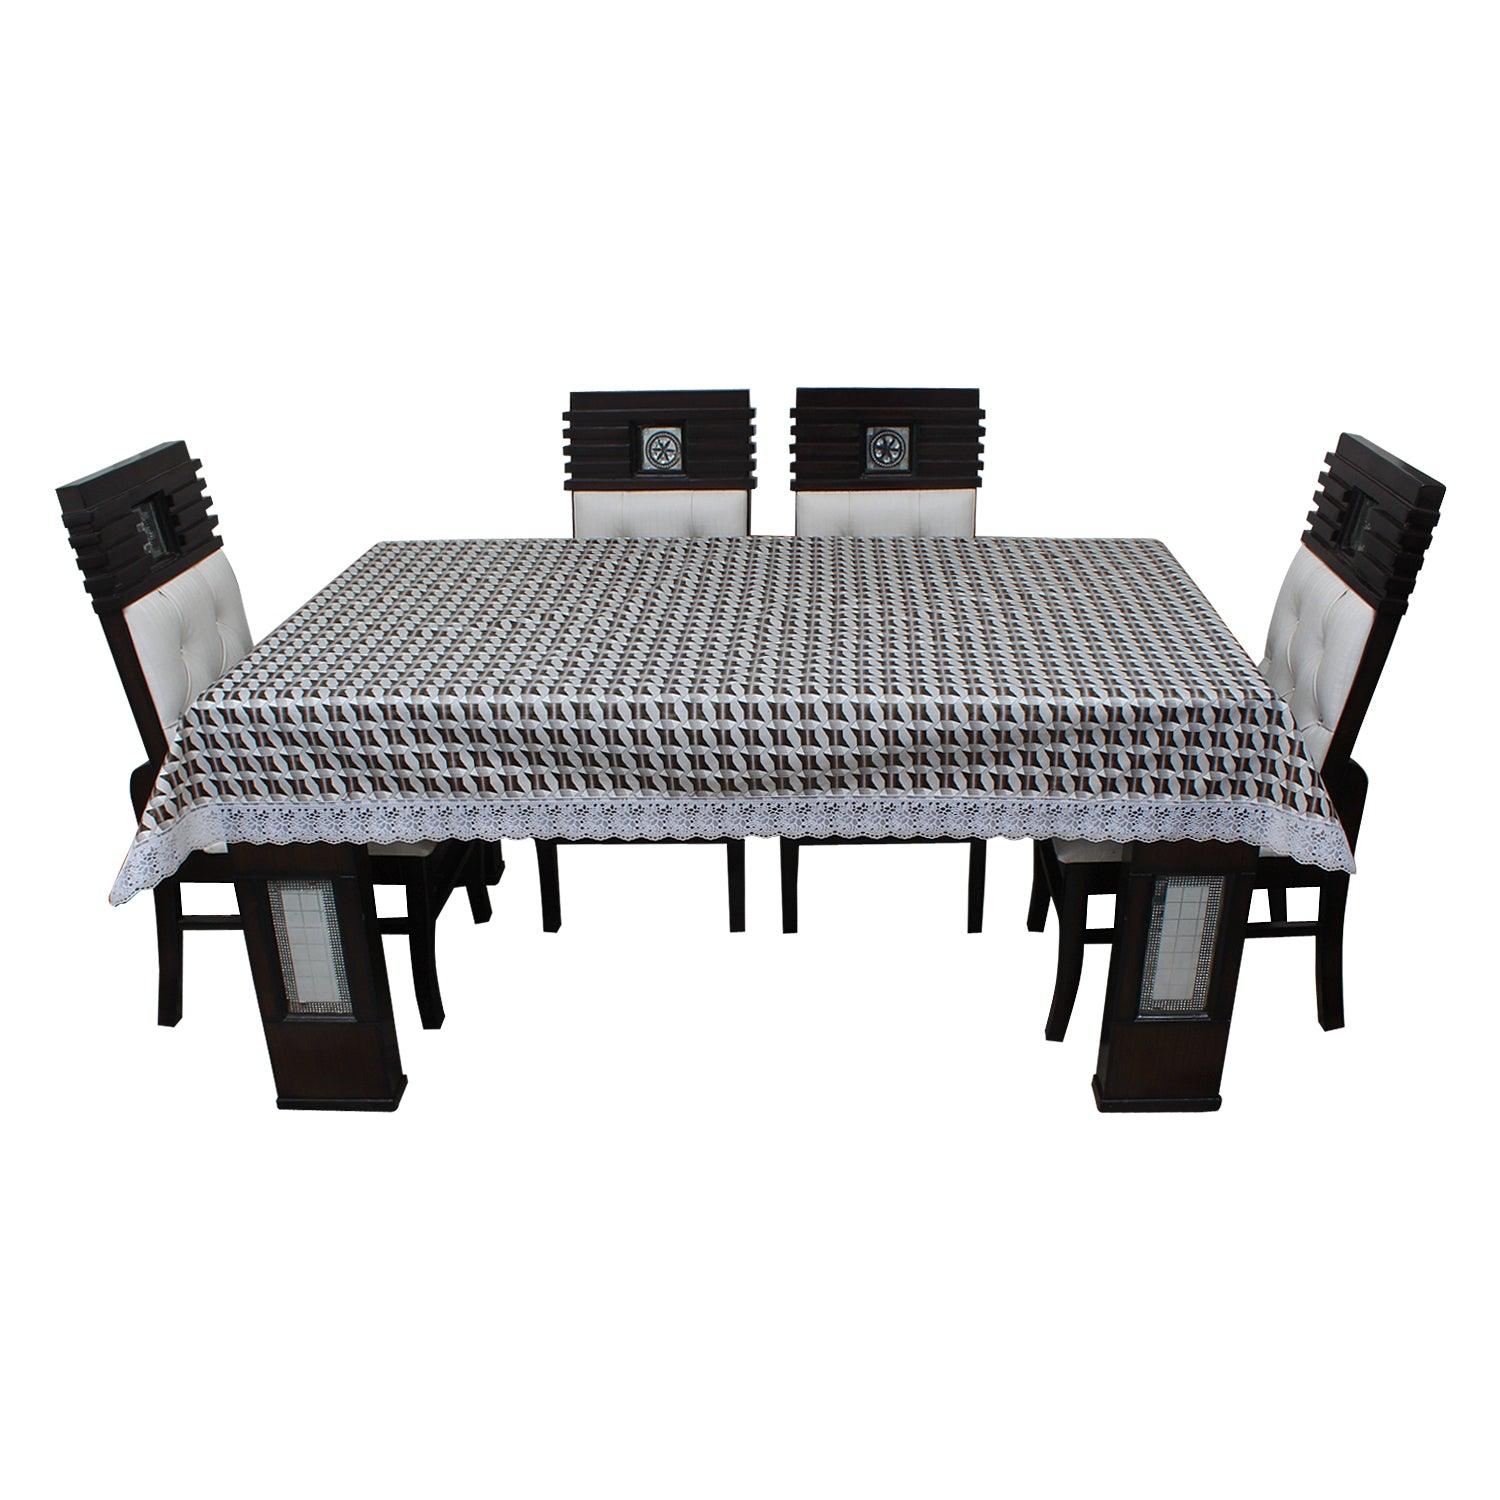 Waterproof and Dustproof Dining Table Cover, SA09 - Dream Care Furnishings Private Limited